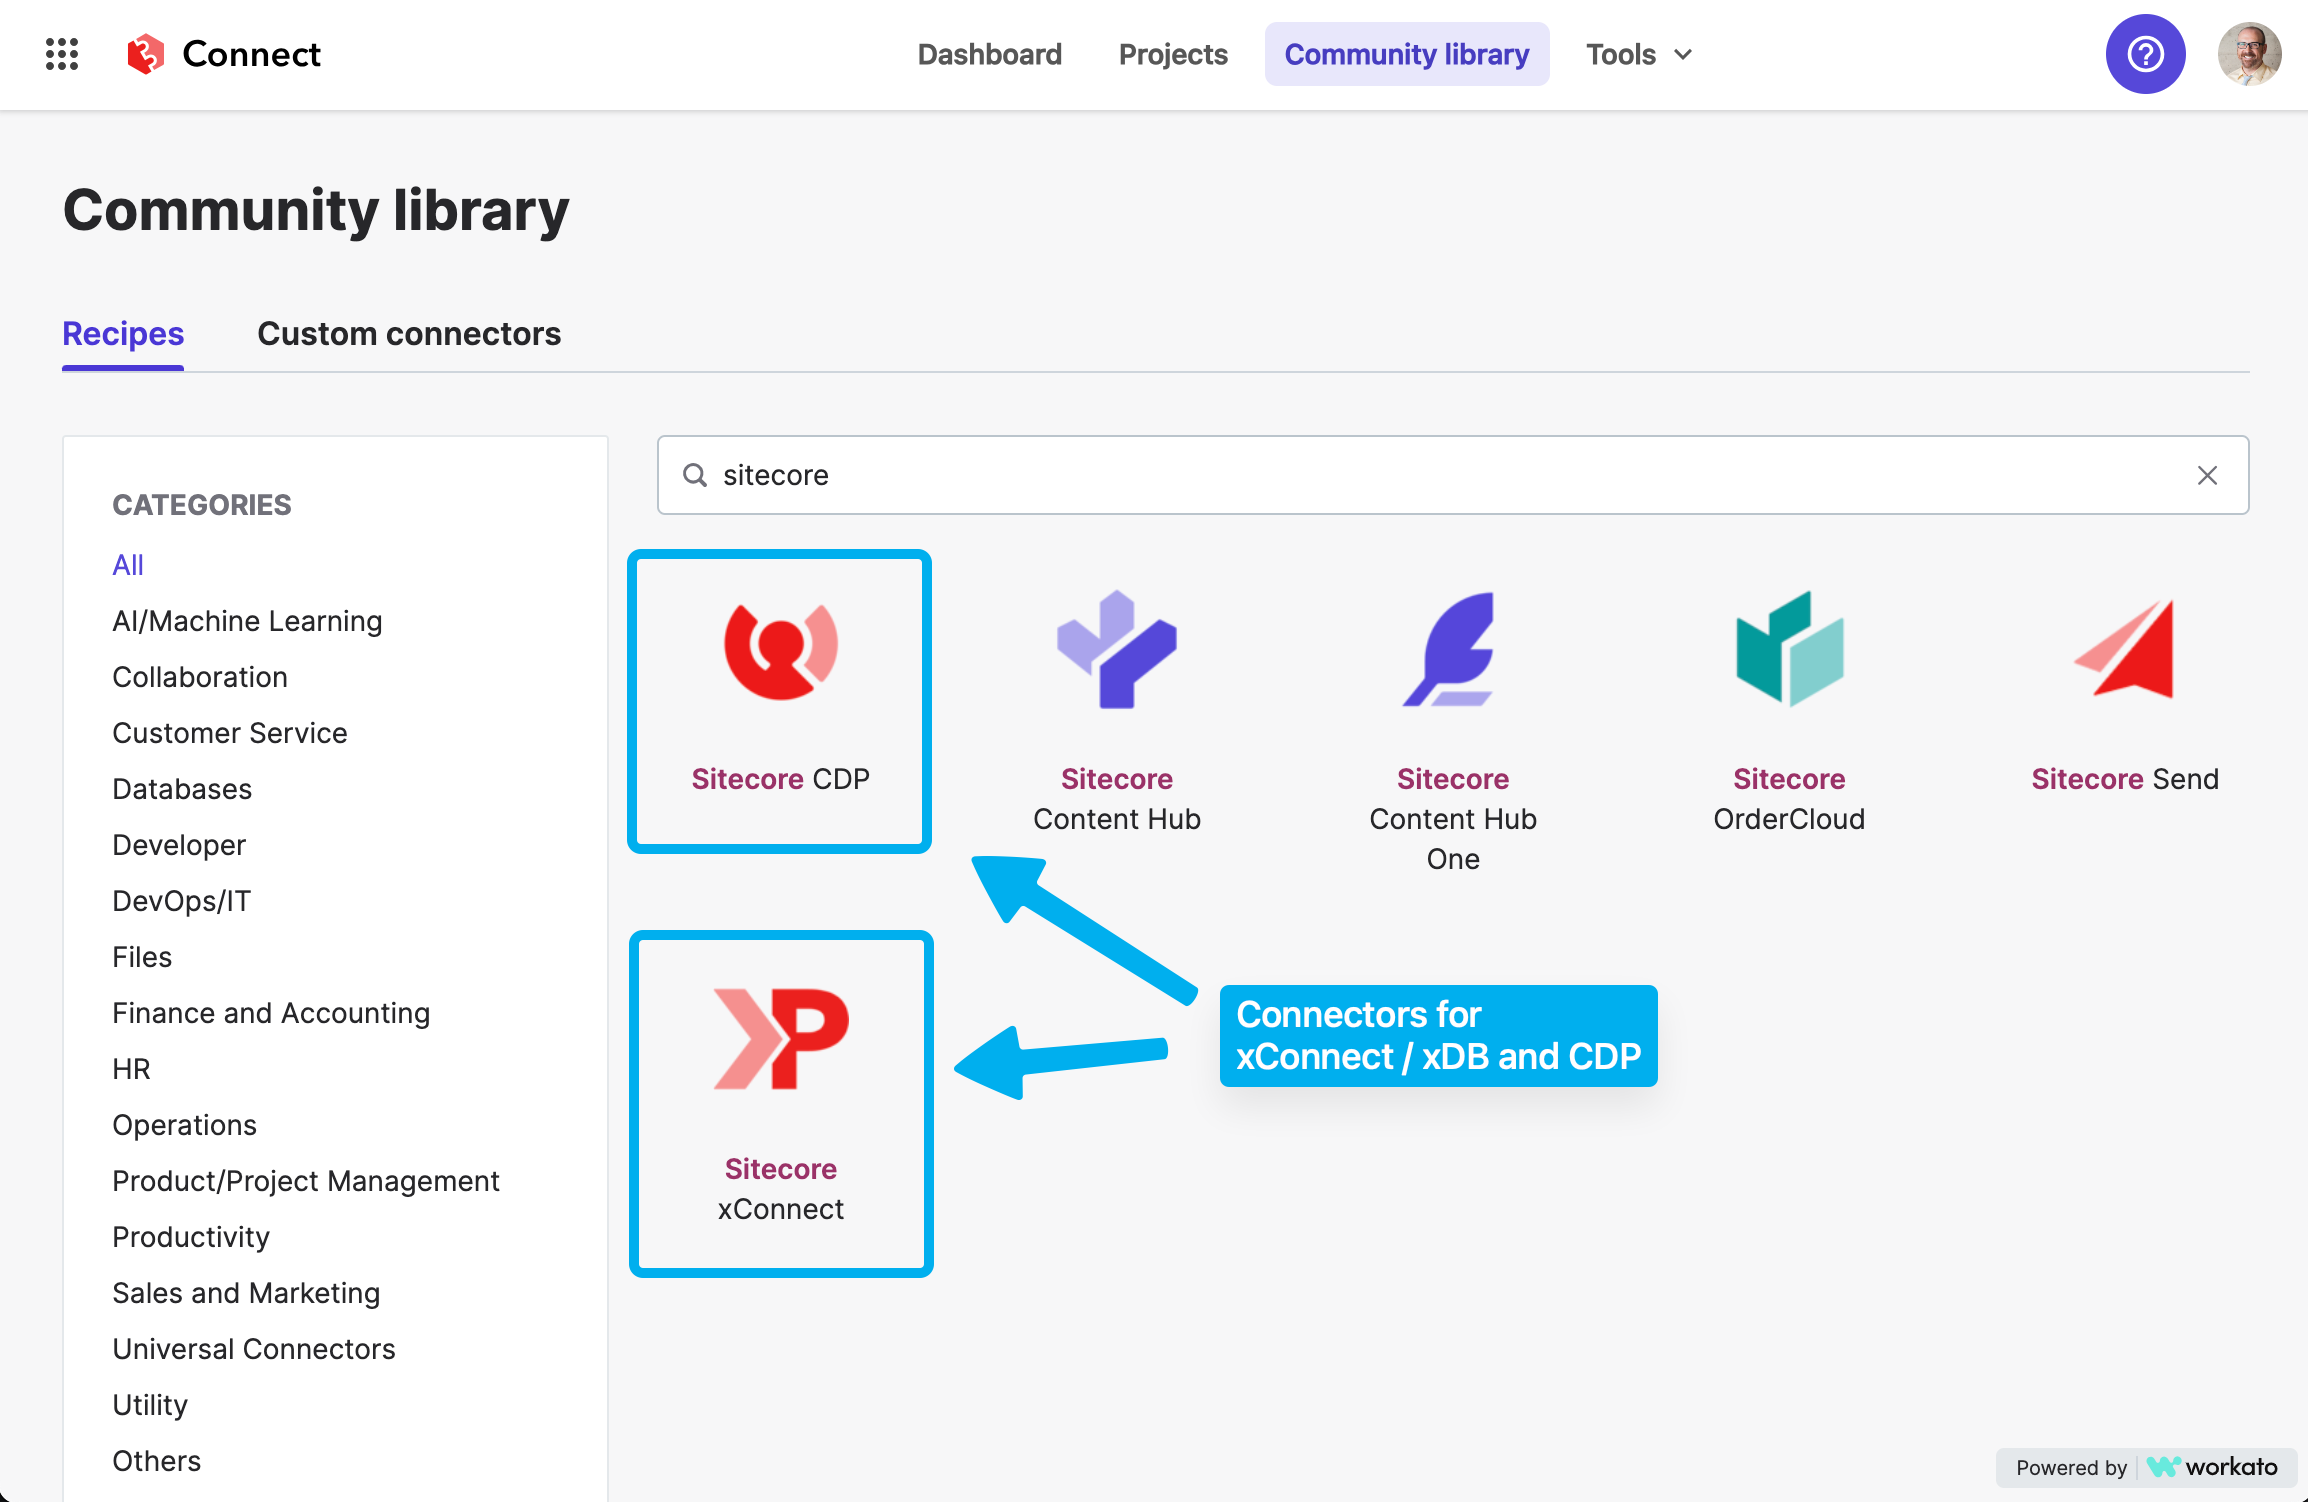 Screenshot of Sitecore's Connect community library with various integration connectors and categories displayed.